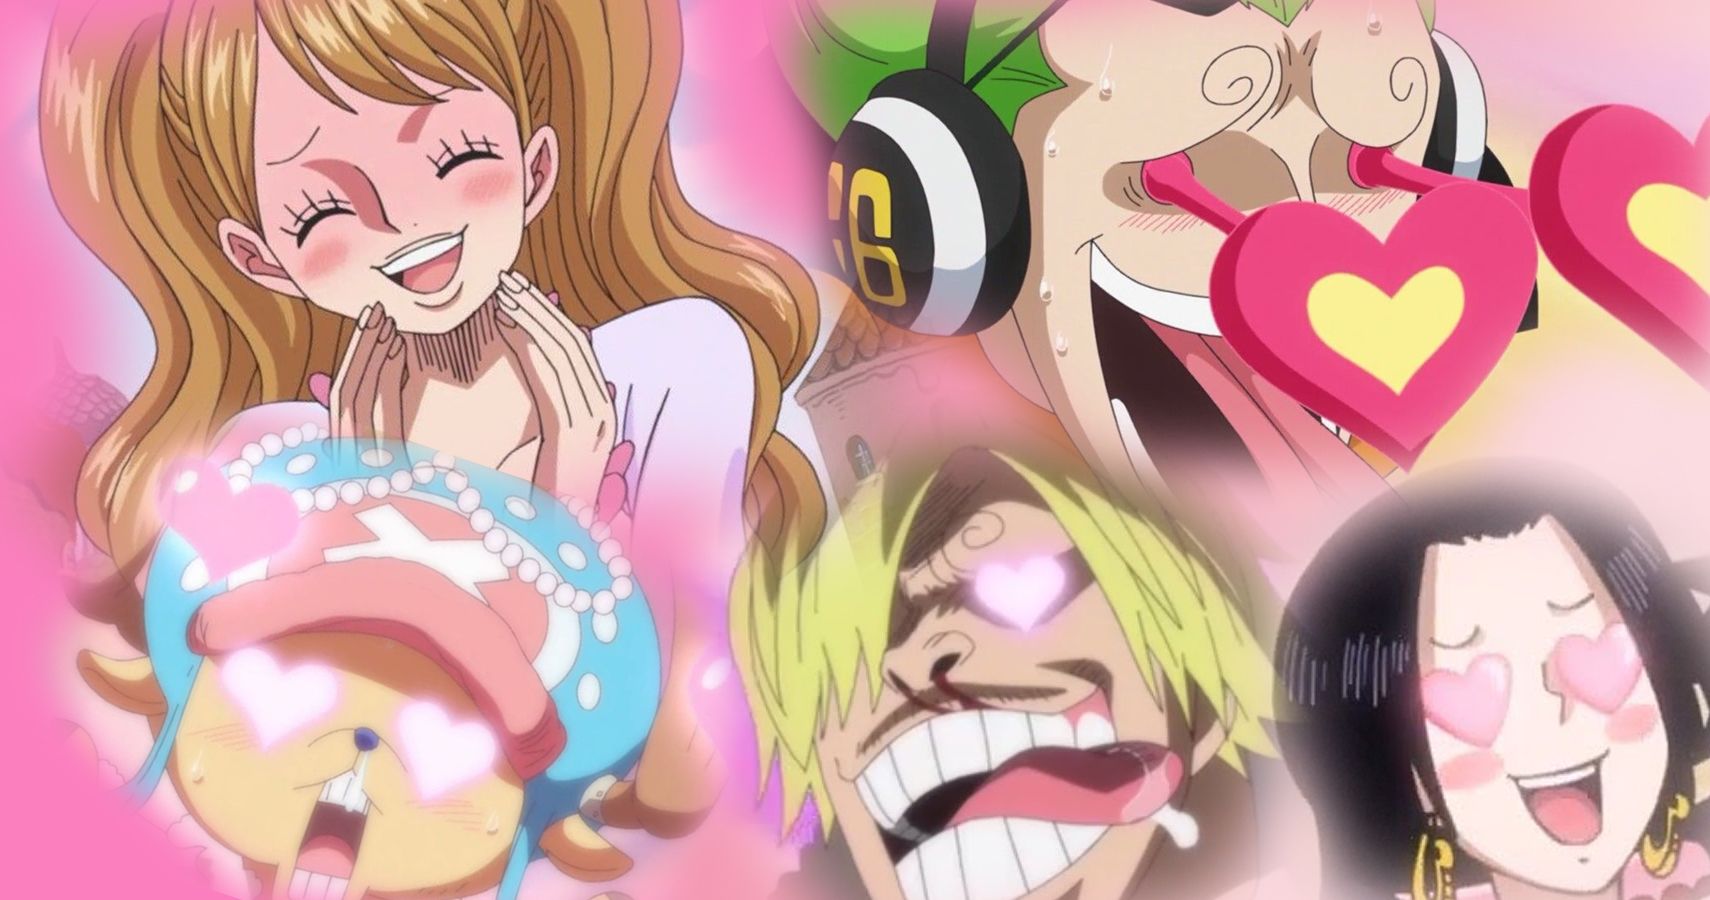 The Romance of Sanji and Nami at the End of One Piece 